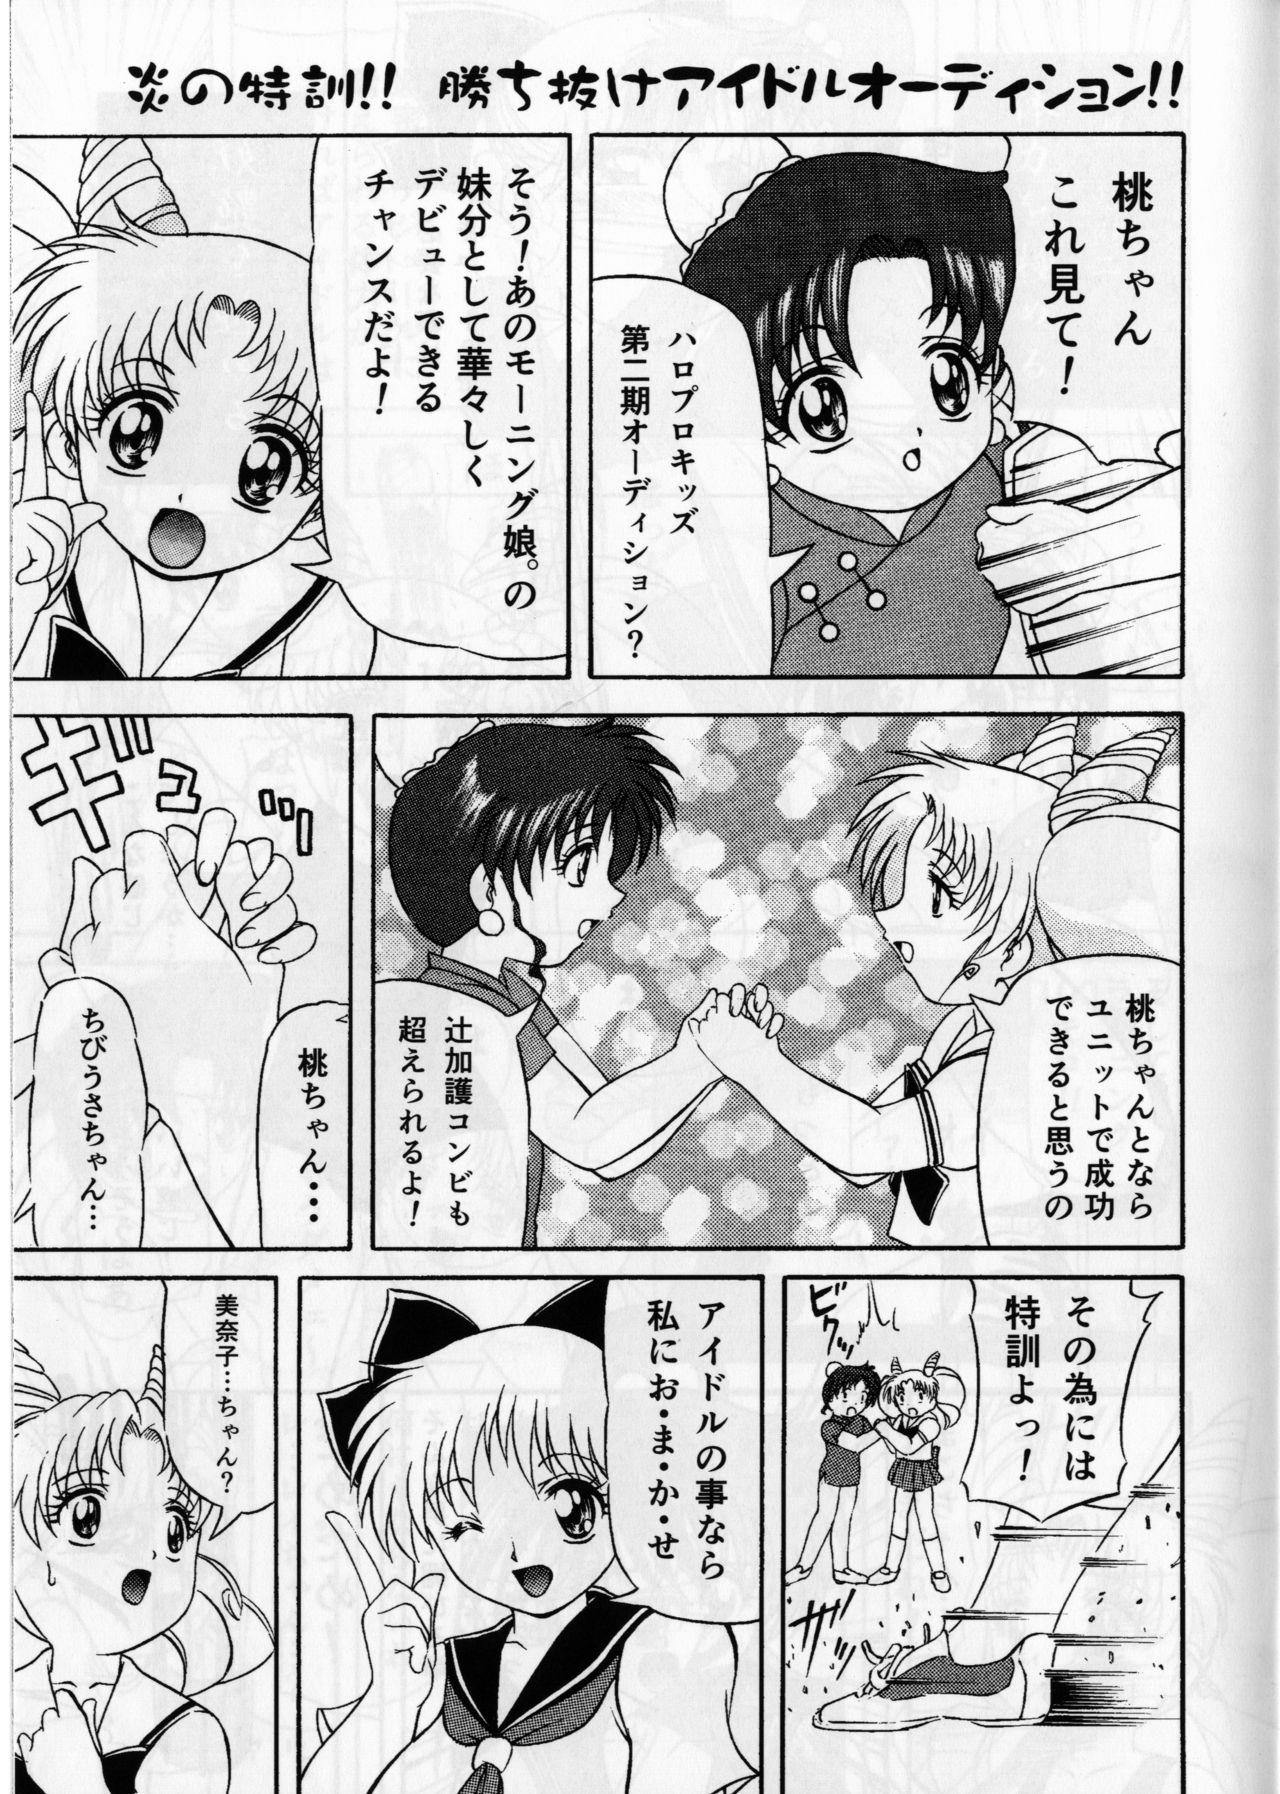 Point Of View Pink Sugar 20th Anniversary Special - Sailor moon Roludo - Page 7